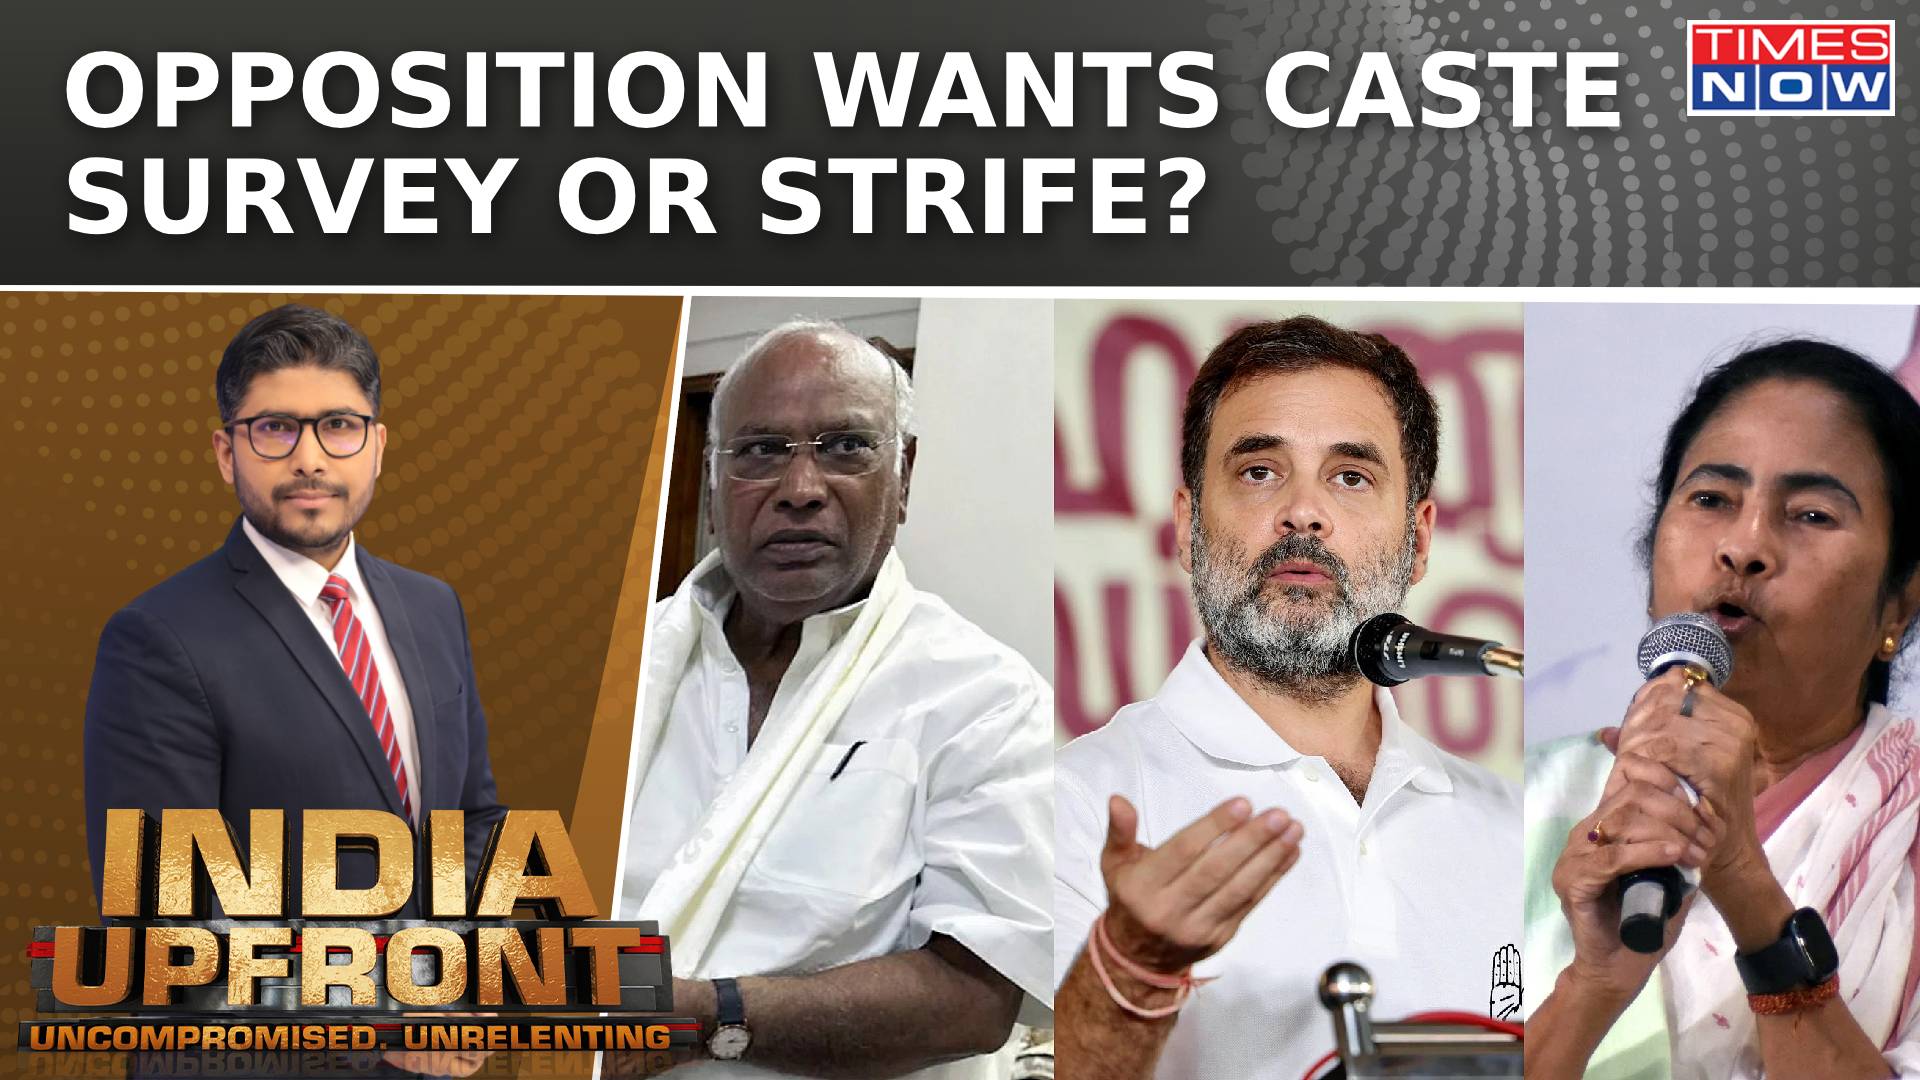 Caste Census Row Team INDIA Objects To Caste Inquiry BJP Counters Opposition  India upfront